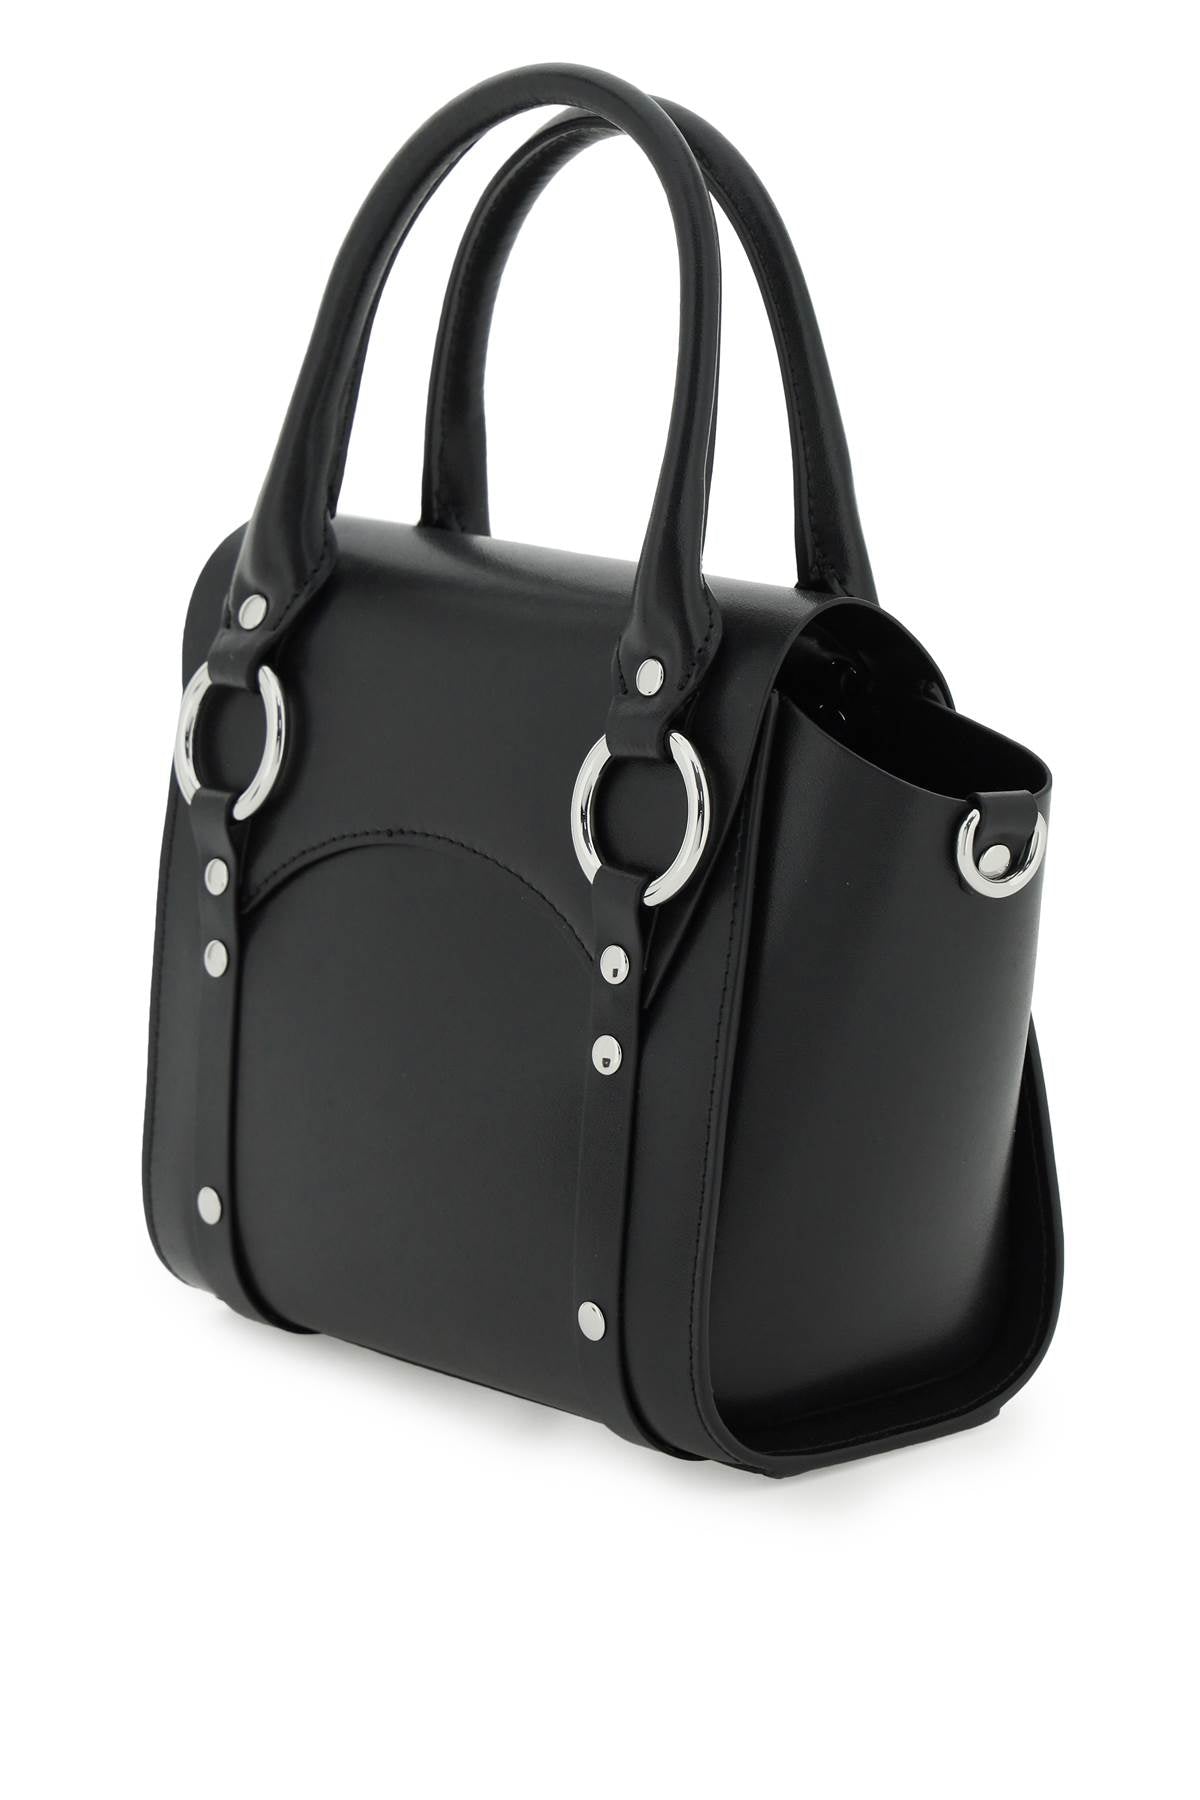 Black Leather Betty Handbag with Iconic Silver Orb